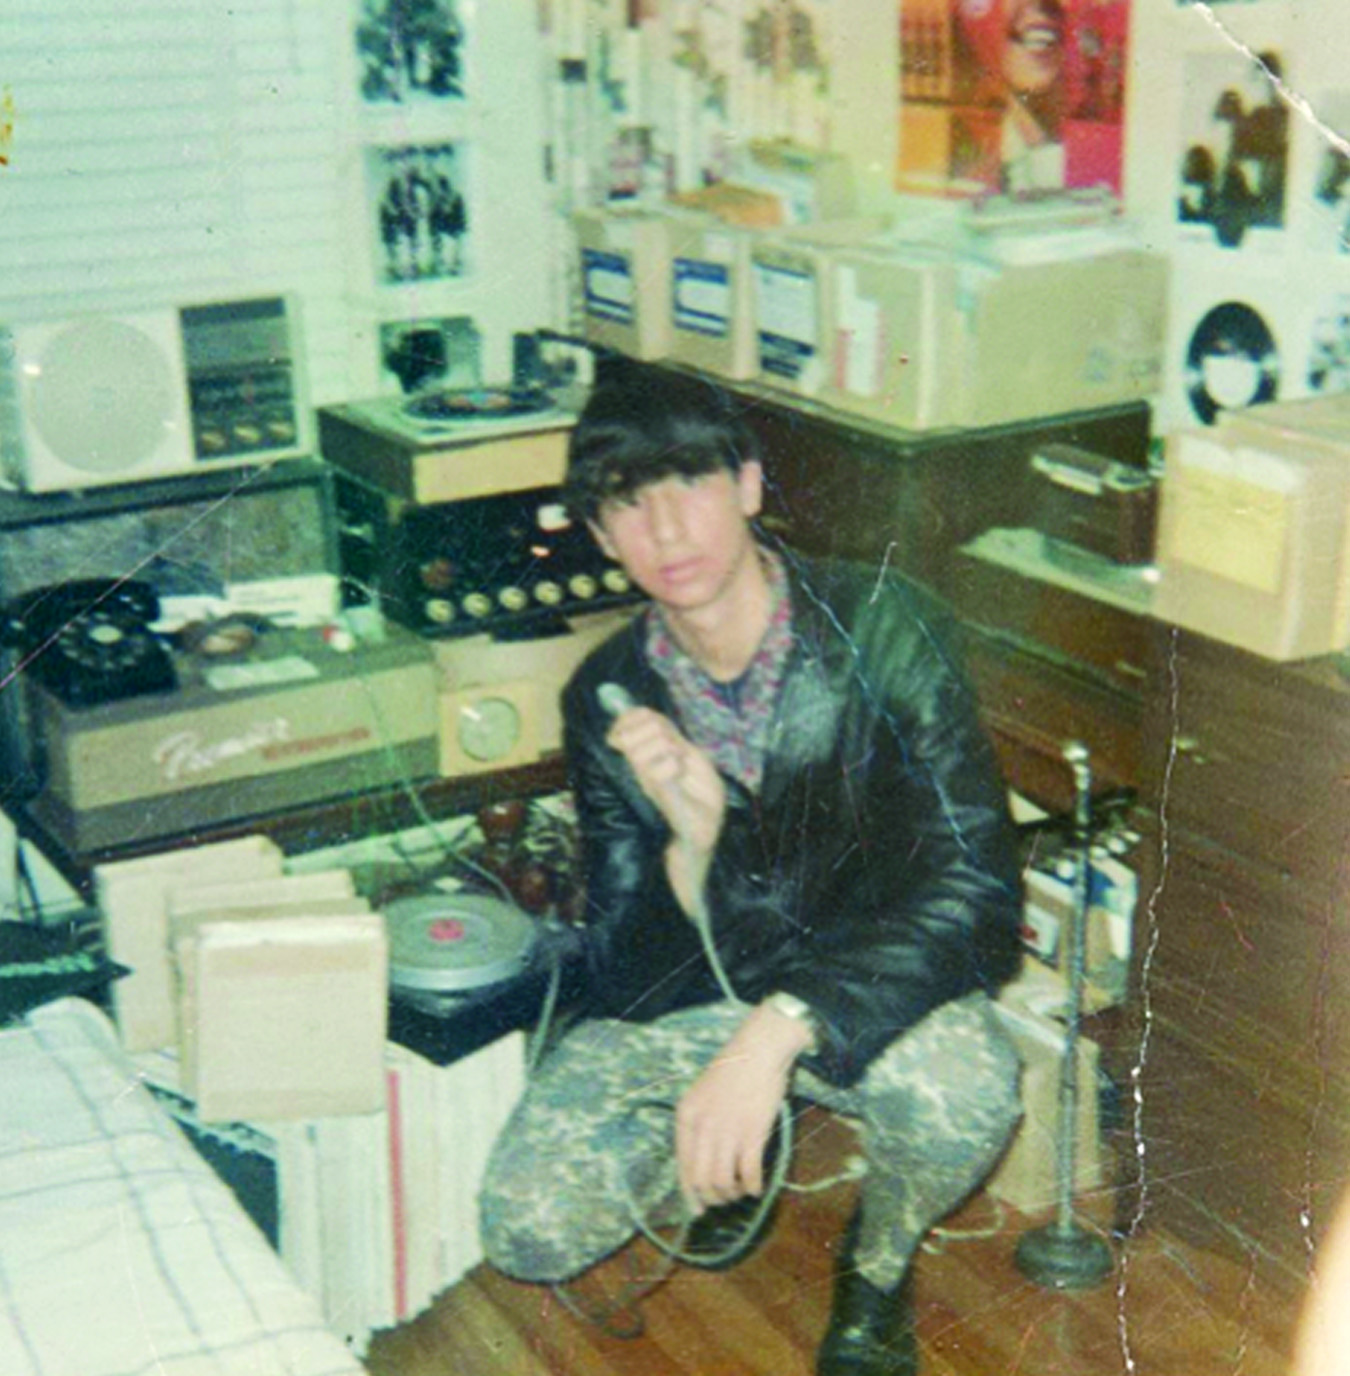 16-year-old Sheldon and his DJ Equipment